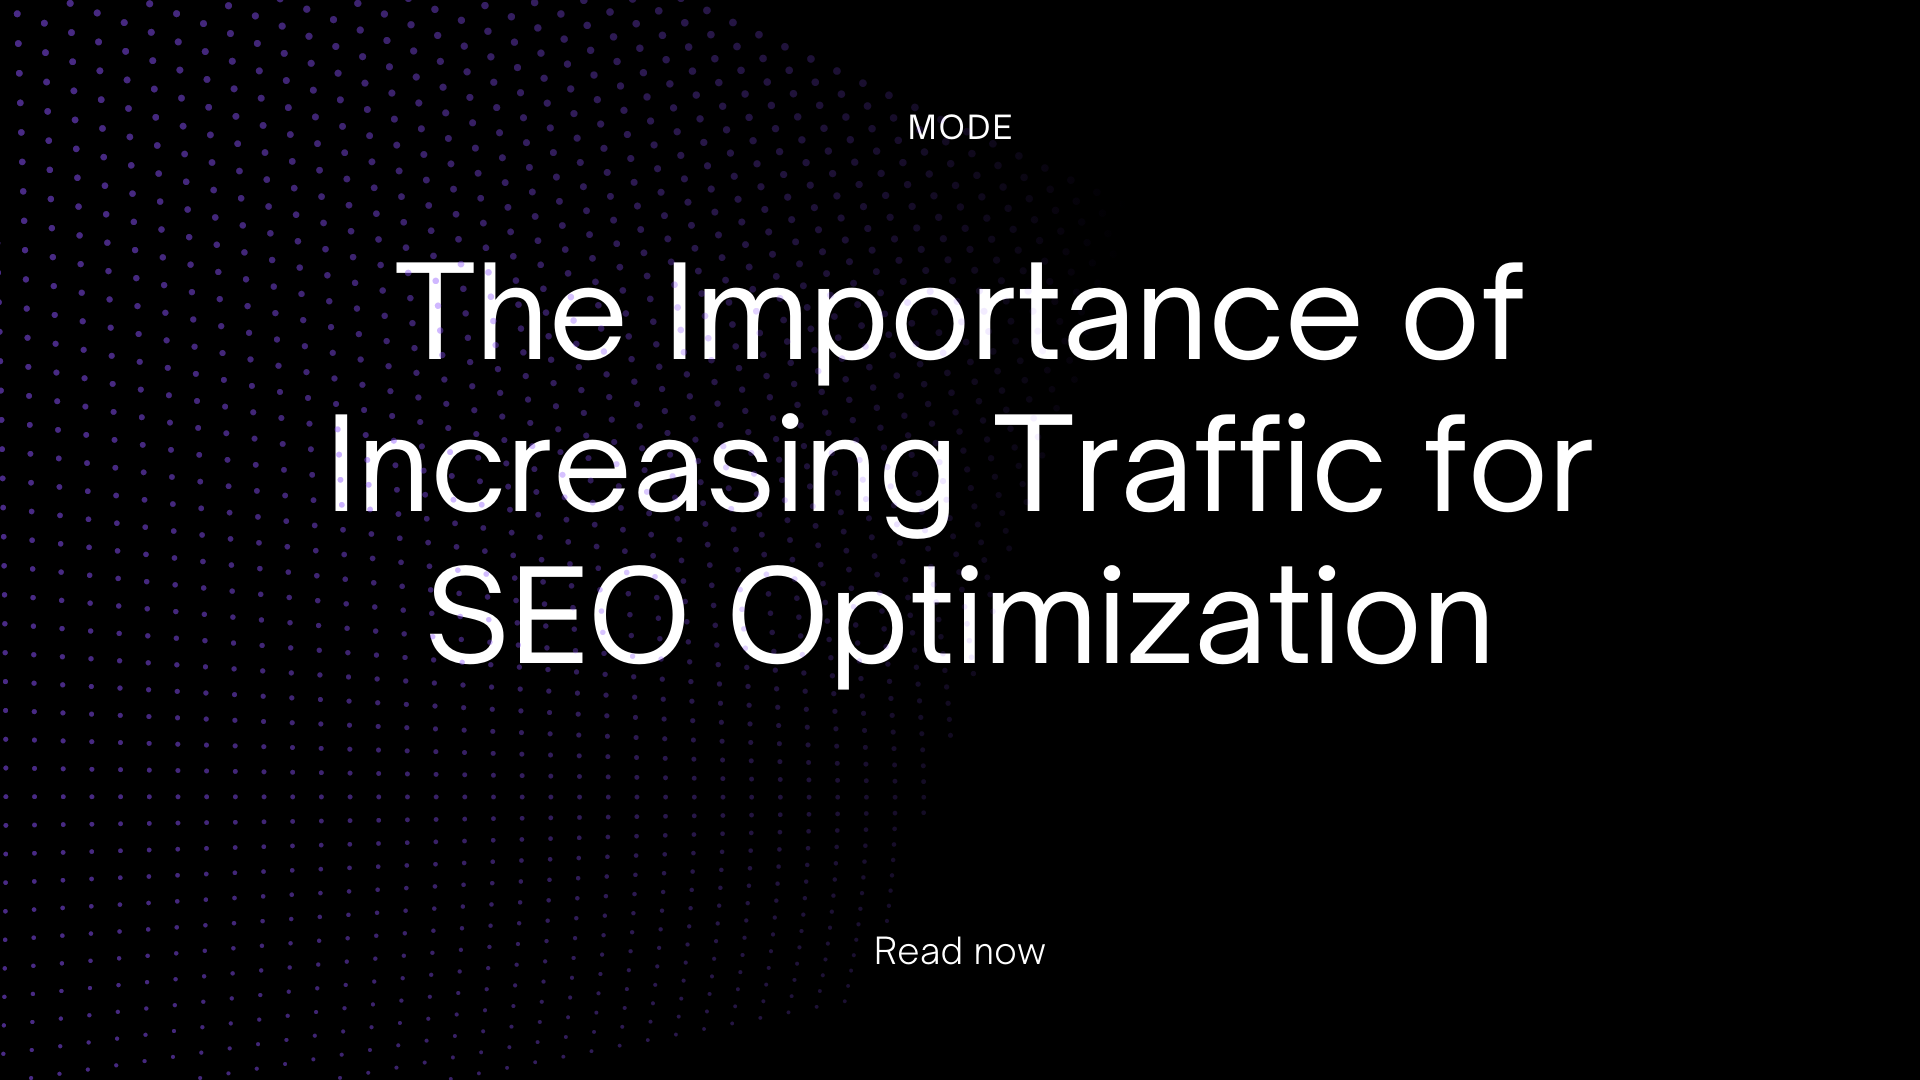 The Importance of Increasing Traffic for SEO Optimization